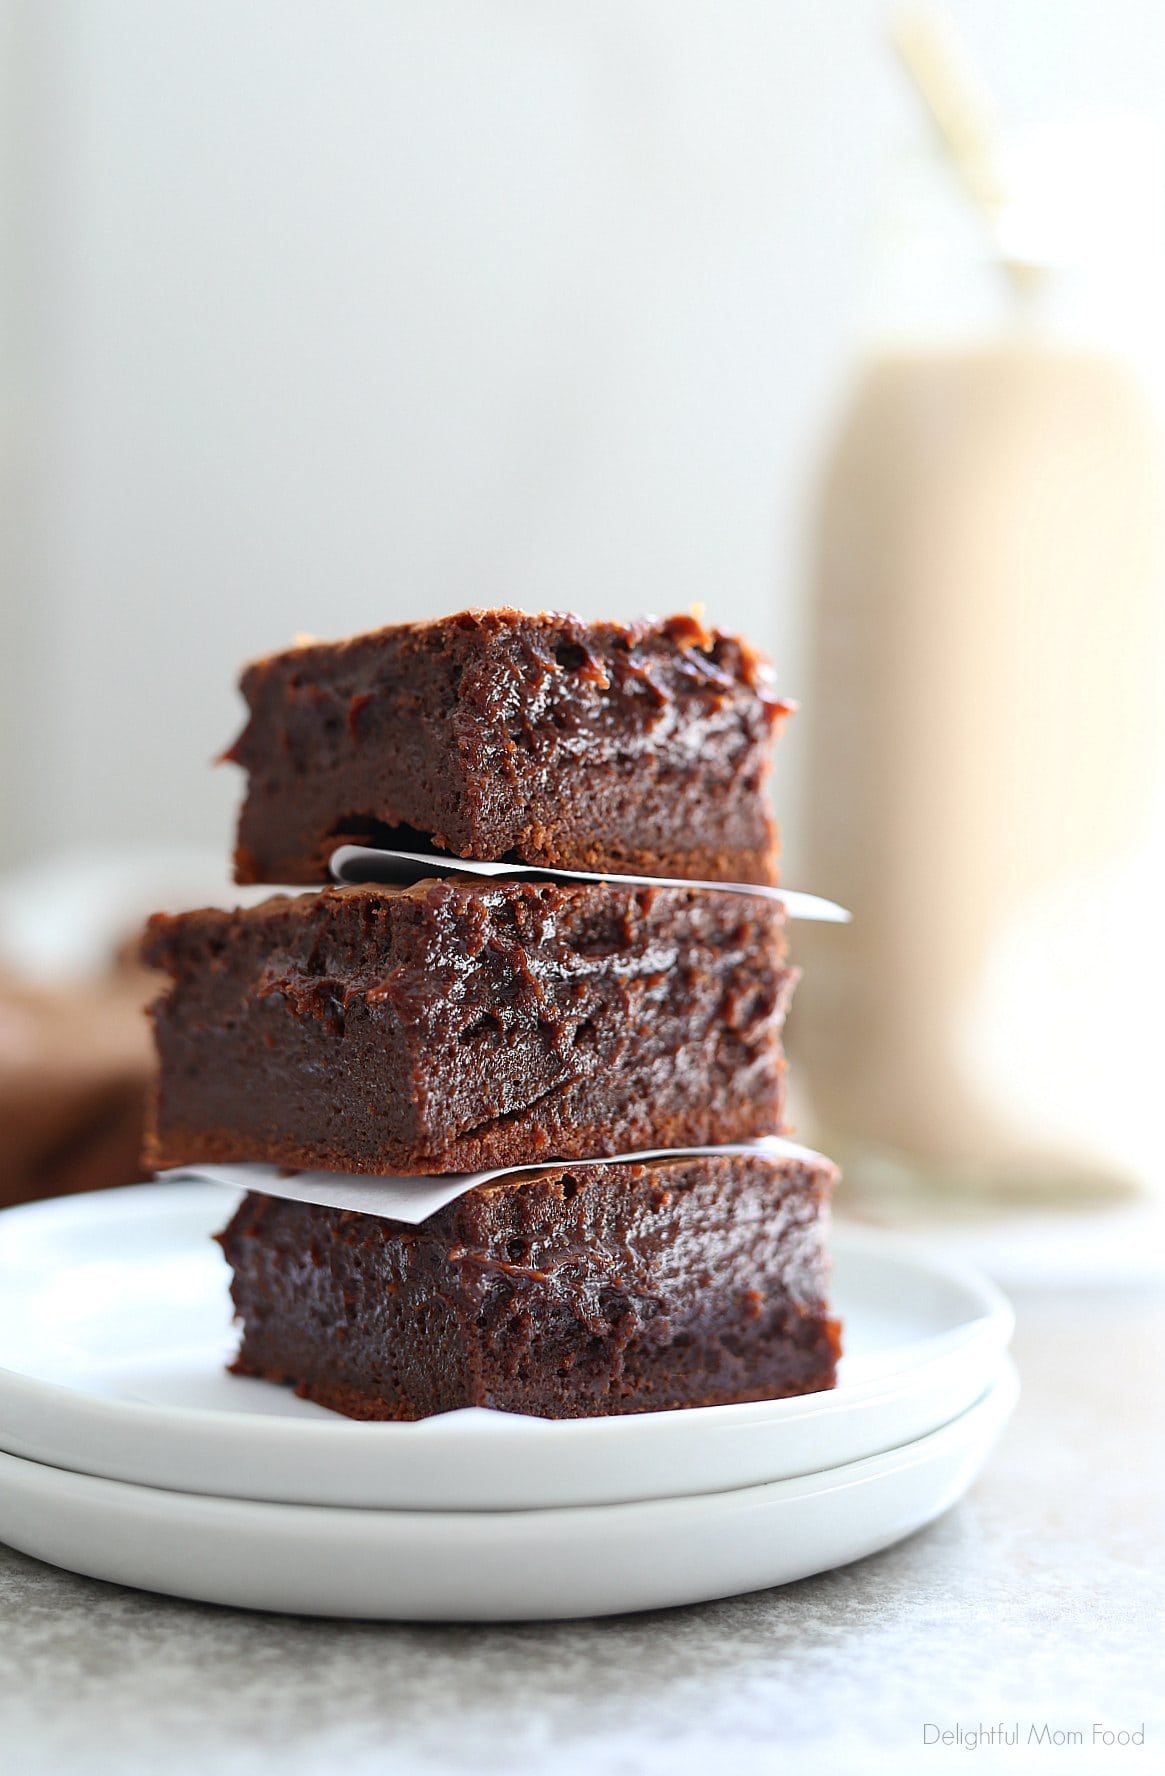 Extra fudgy coconut oil brownies! This is by far the BEST gluten-free brownie recipe with a rich chocolate center that melts in your mouth! These easy brownies take little time to whip up and are a crowd-pleaser every time! #coconutoilbrownies #dessert #treats #sweets #brownie #recipe #easy #quick #glutenfreebrownierecipe #dairyfreedessert #delightfulmomfood | Recipe at Delightful Mom Food